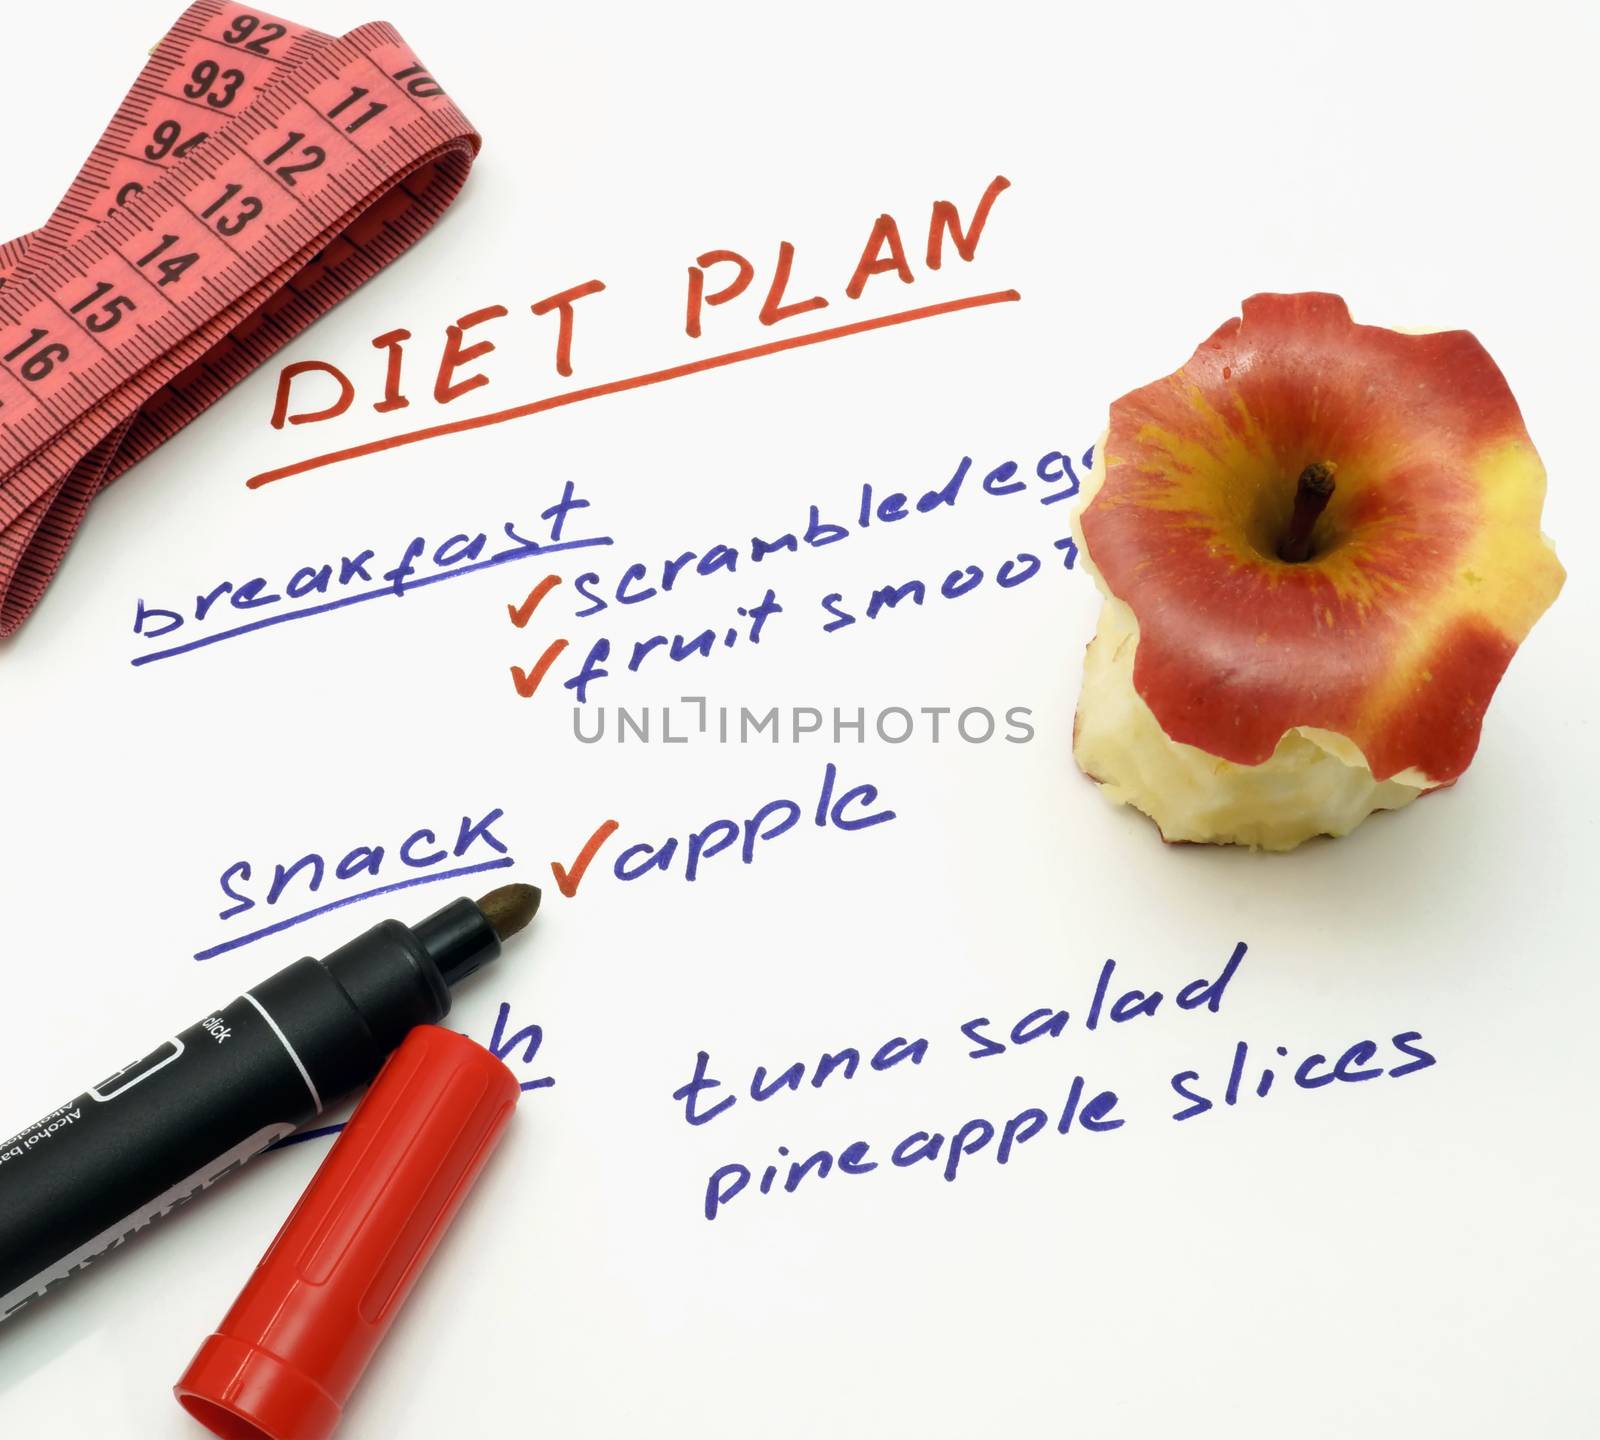 Diet plan with apple, marker and measuring tape